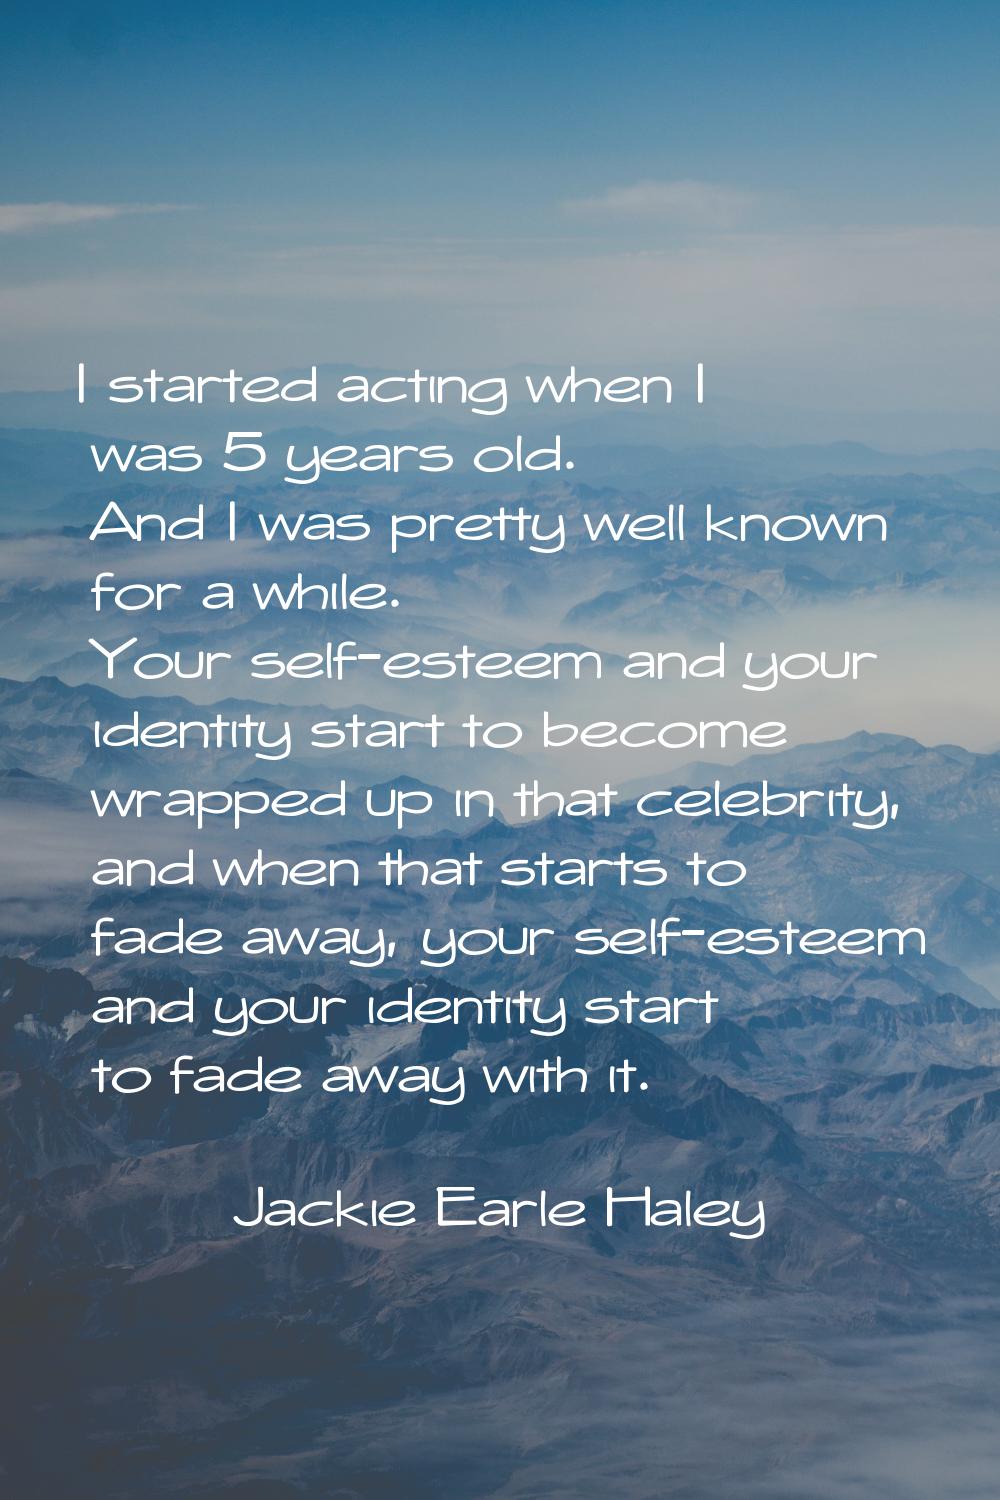 I started acting when I was 5 years old. And I was pretty well known for a while. Your self-esteem 